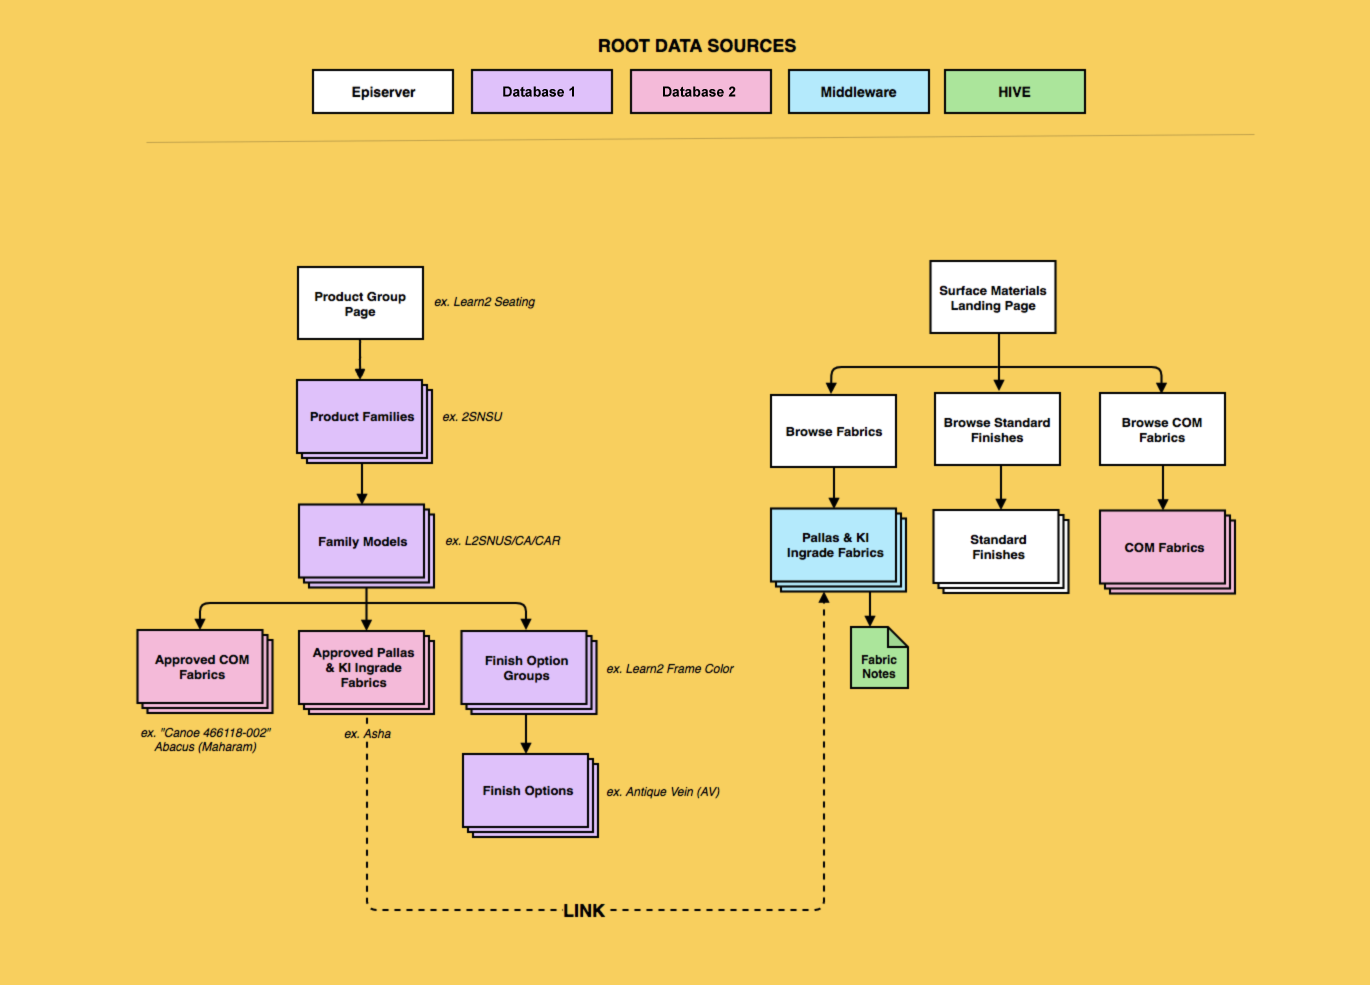 Flowchart showing how the site pulls in data from different root data sources